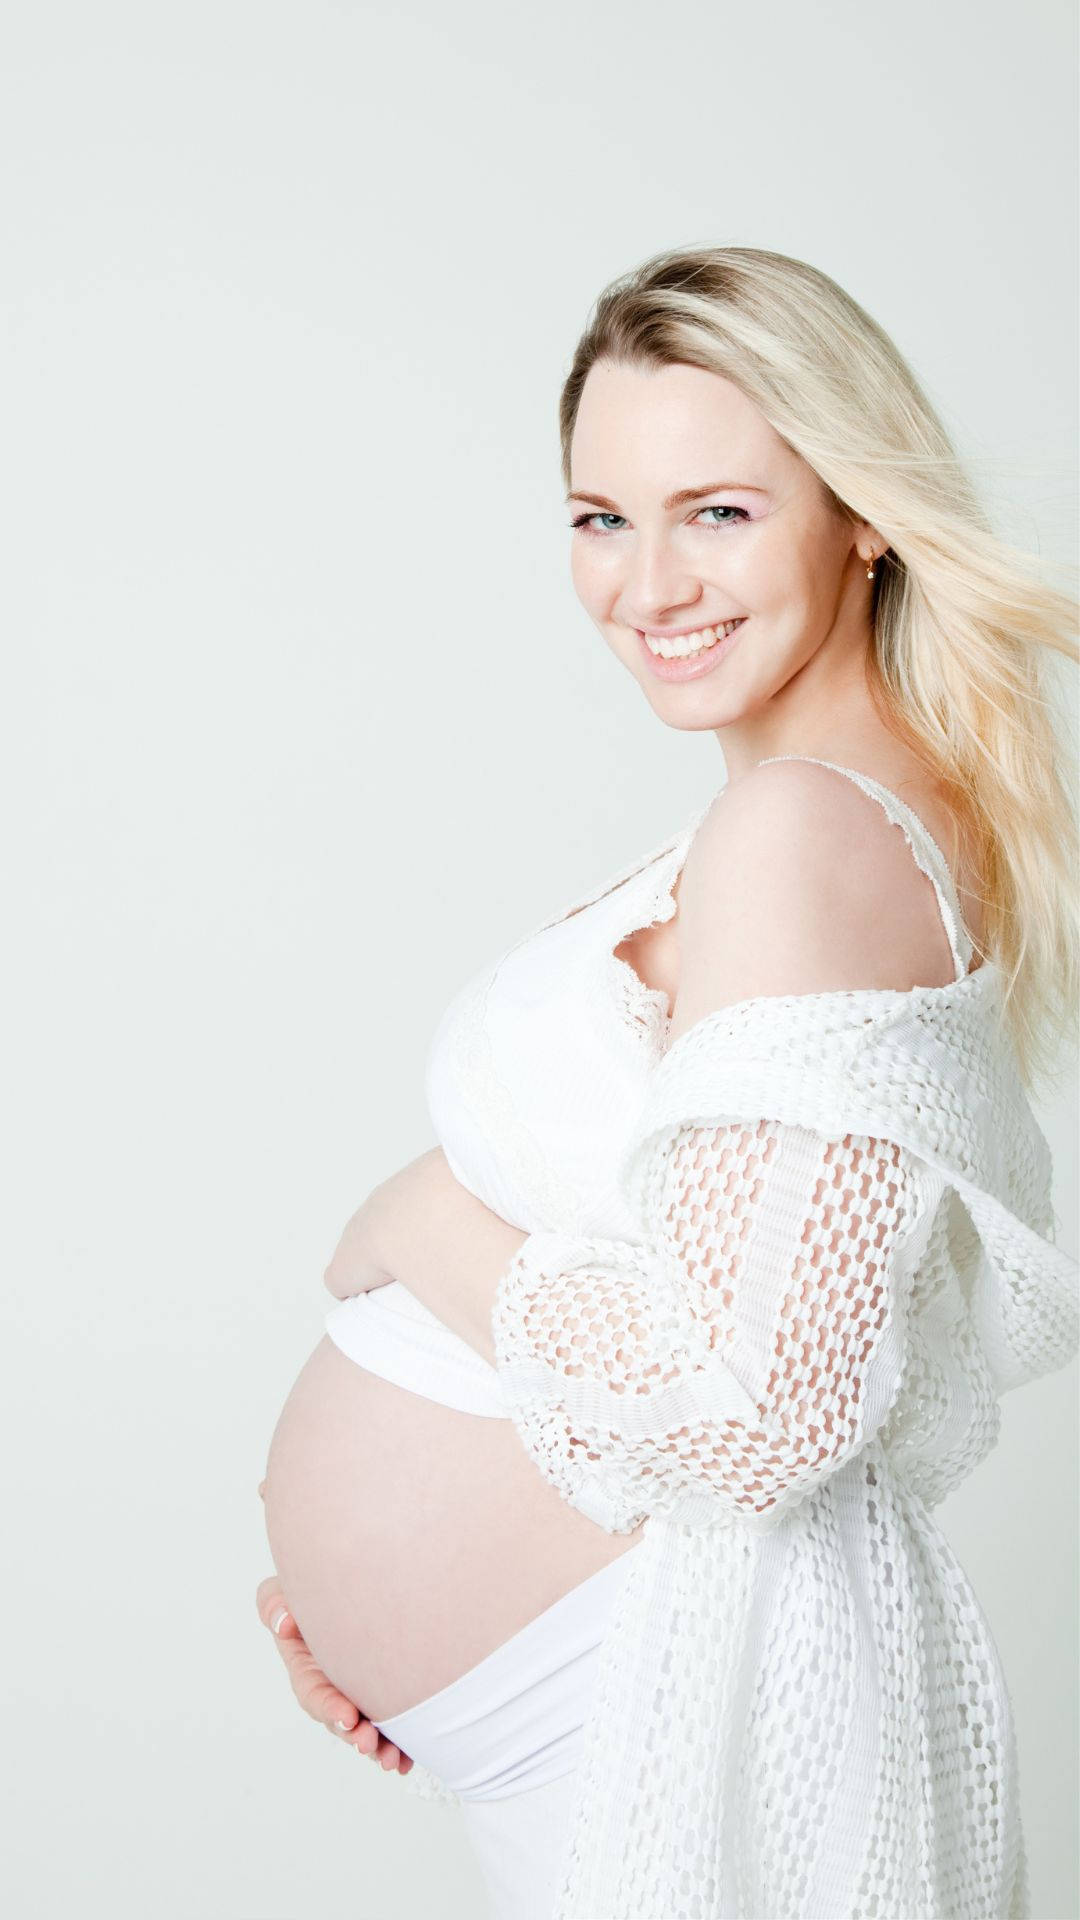 Pregnancy Woman Smiling With Bump Wallpaper